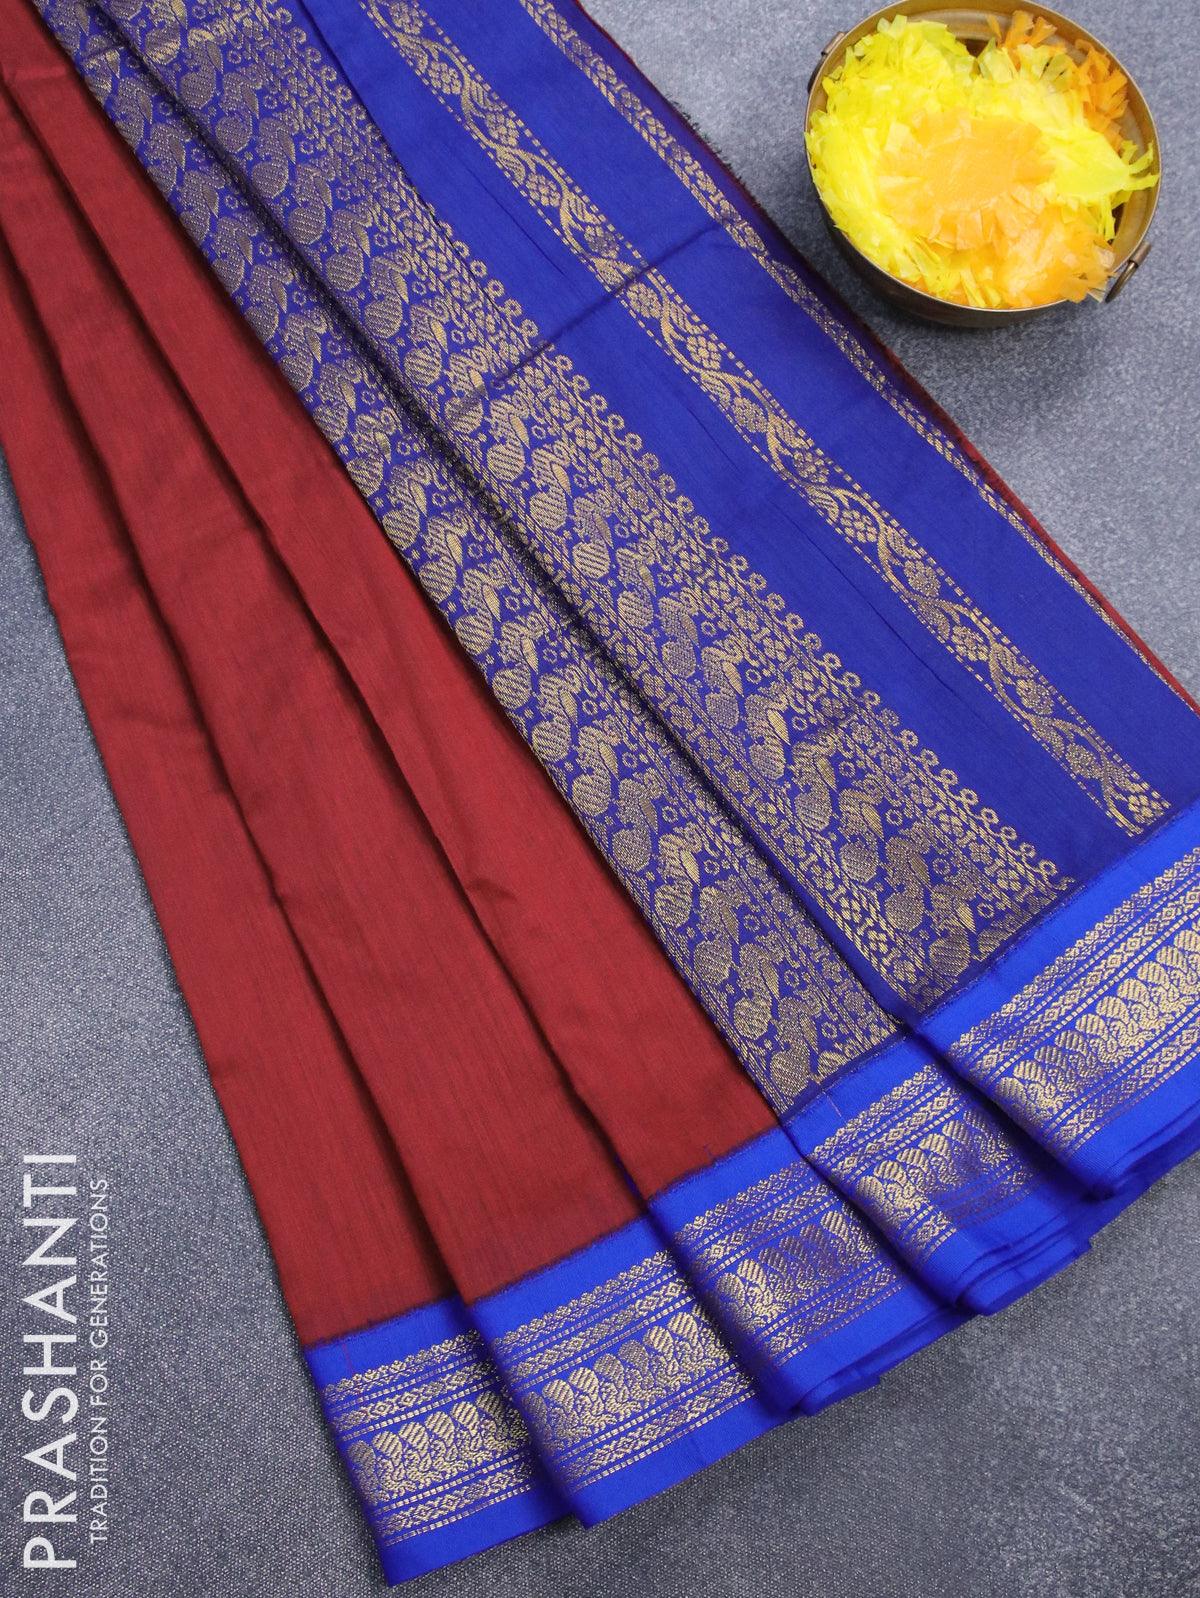 Kalyani cotton saree maroon and blue with thread woven buttas and